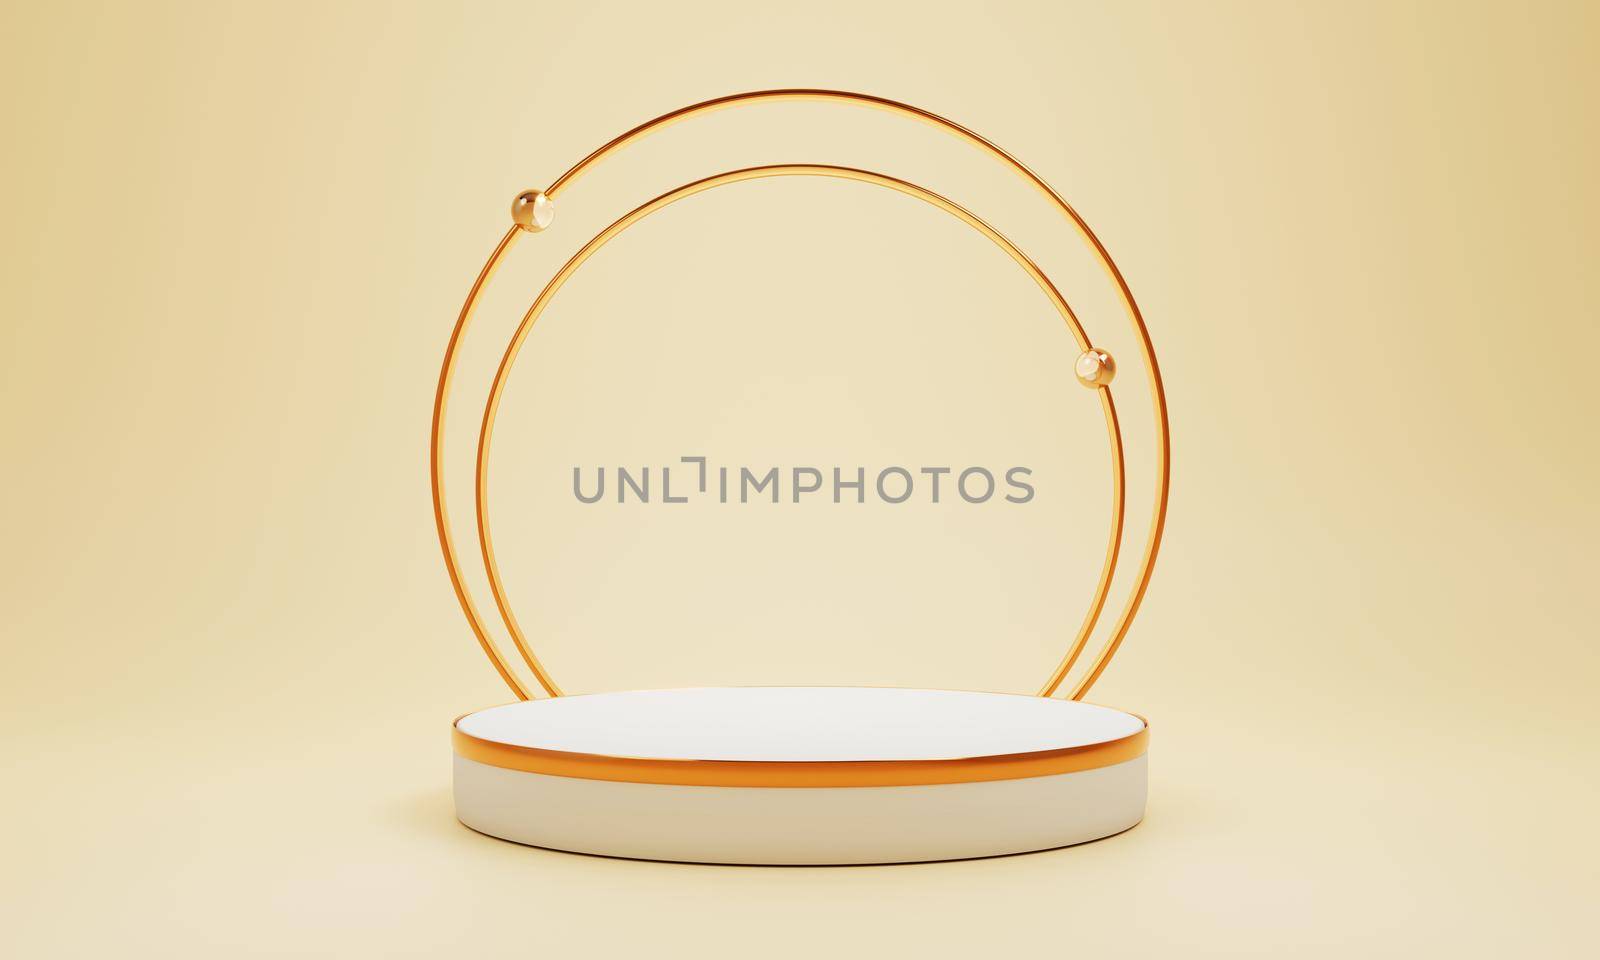 Minimal product podium stage with yellow pastel color and golden ring frame in geometric shape for presentation background. Abstract background and decoration scene template. 3D illustration rendering